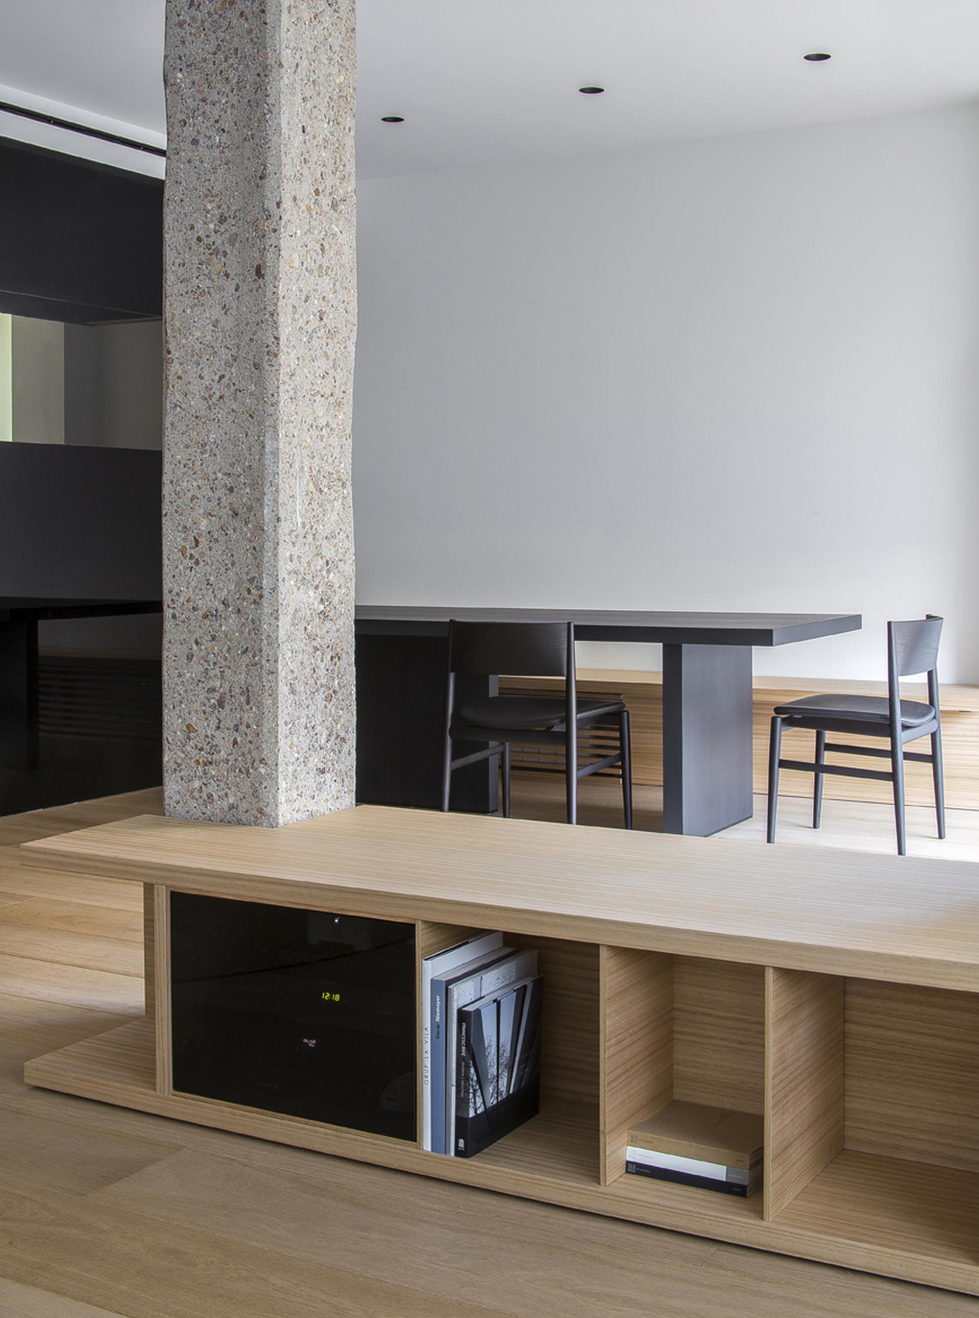 The Apartment with Sliding Panels in Valencia 2